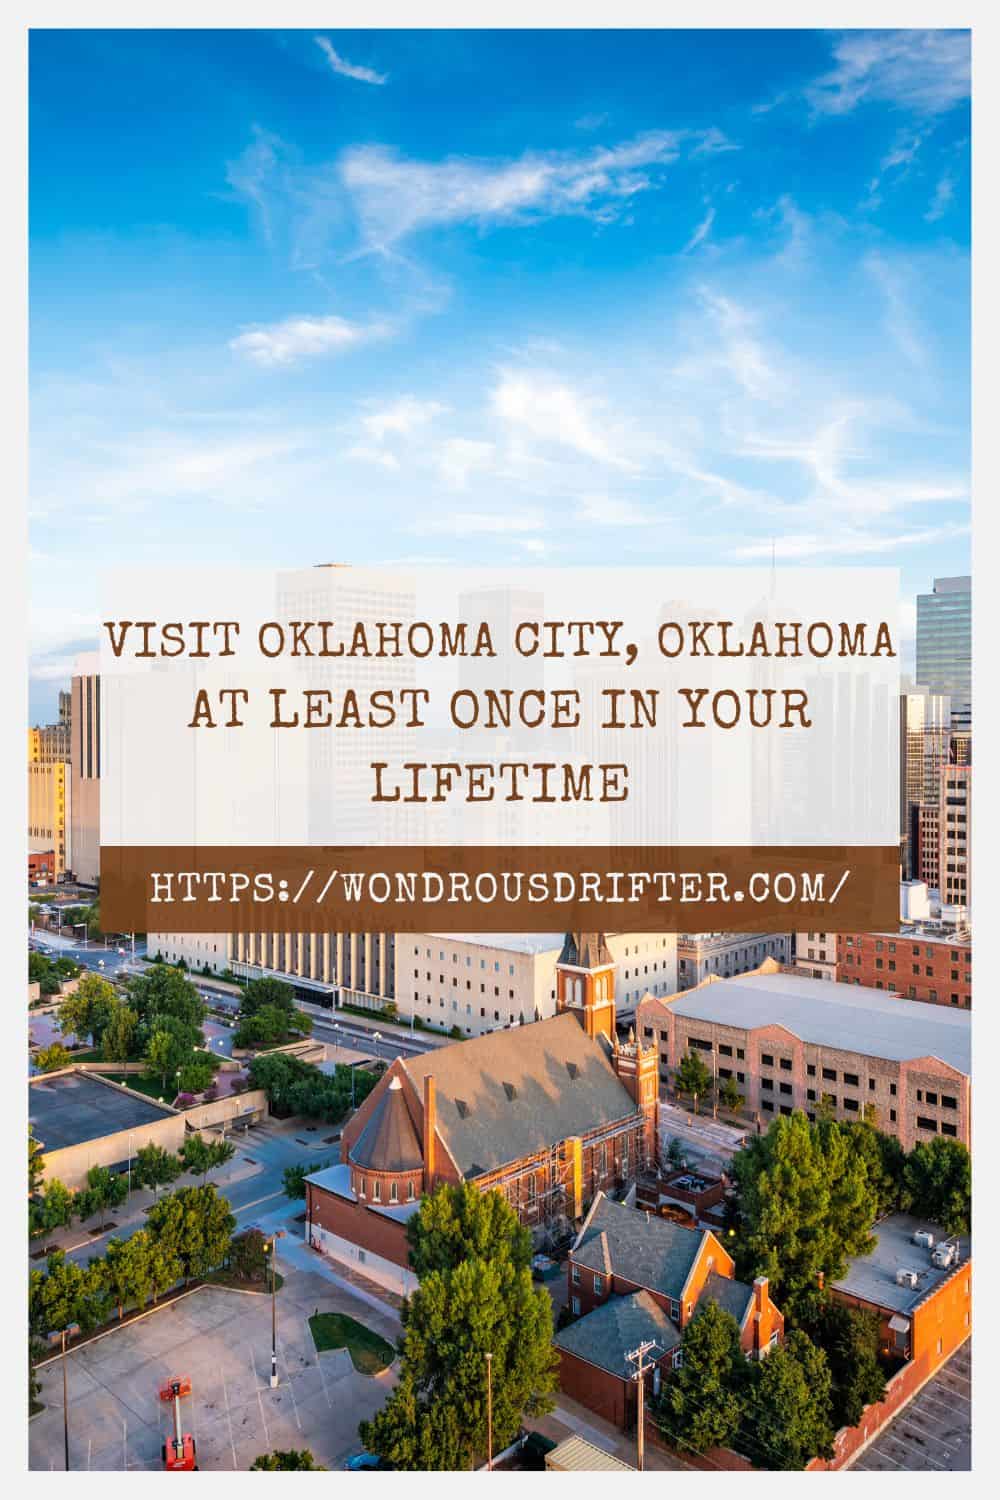 Visit Oklahoma City Oklahoma at least once in your lifetime